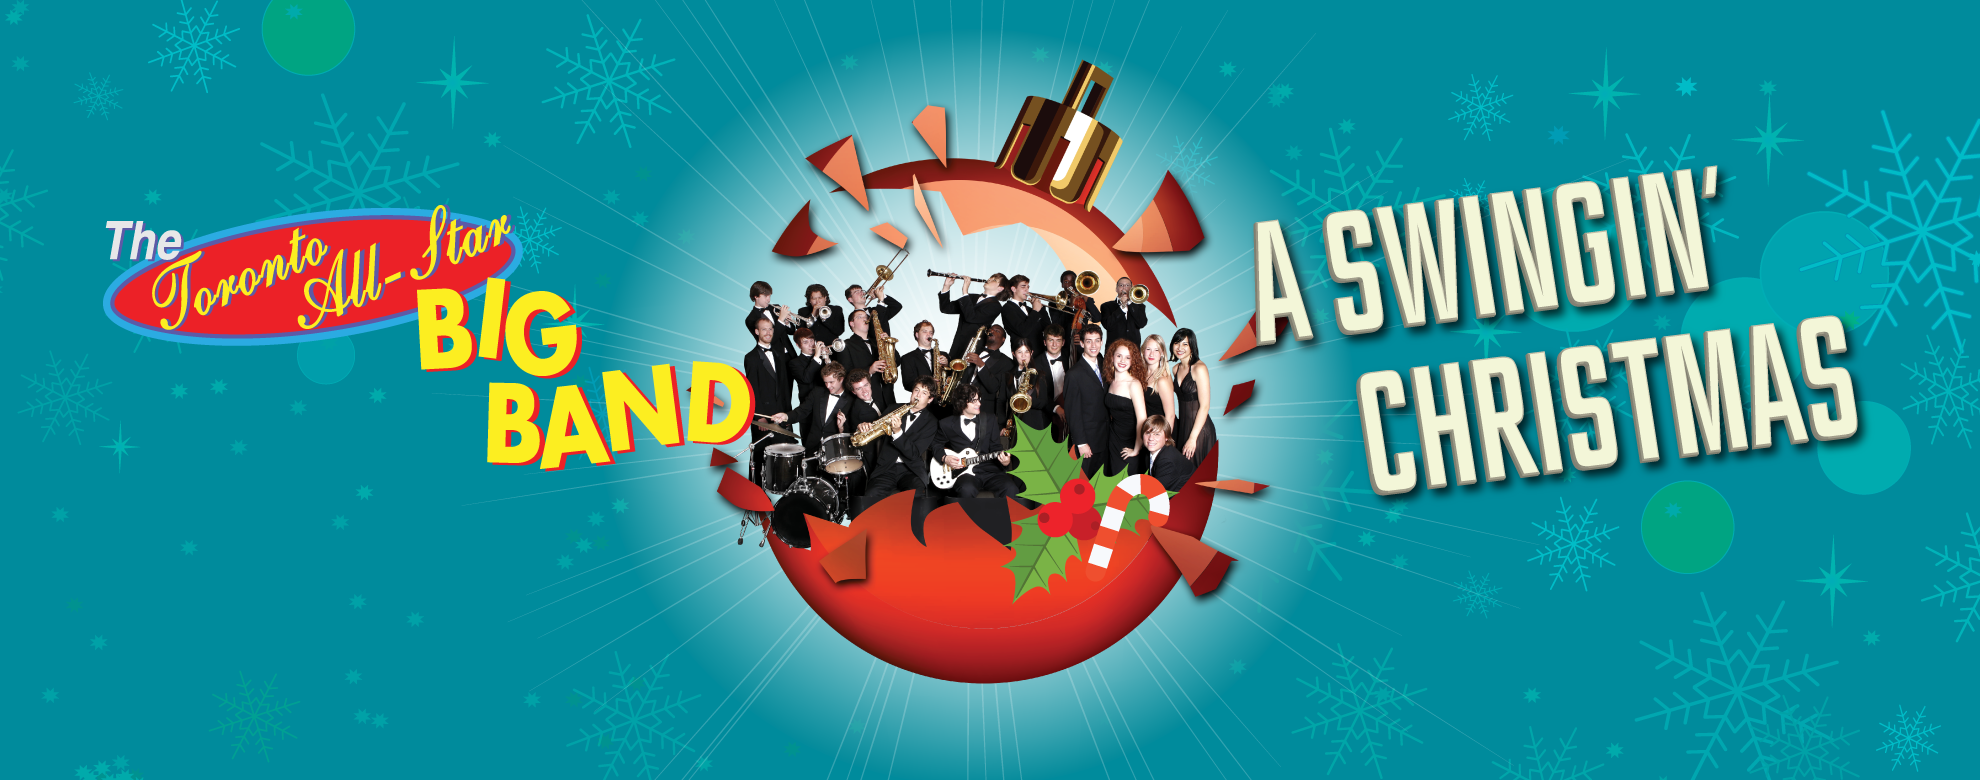 A promo photo for A Swingin' Christmas with Toronto All-Star Big